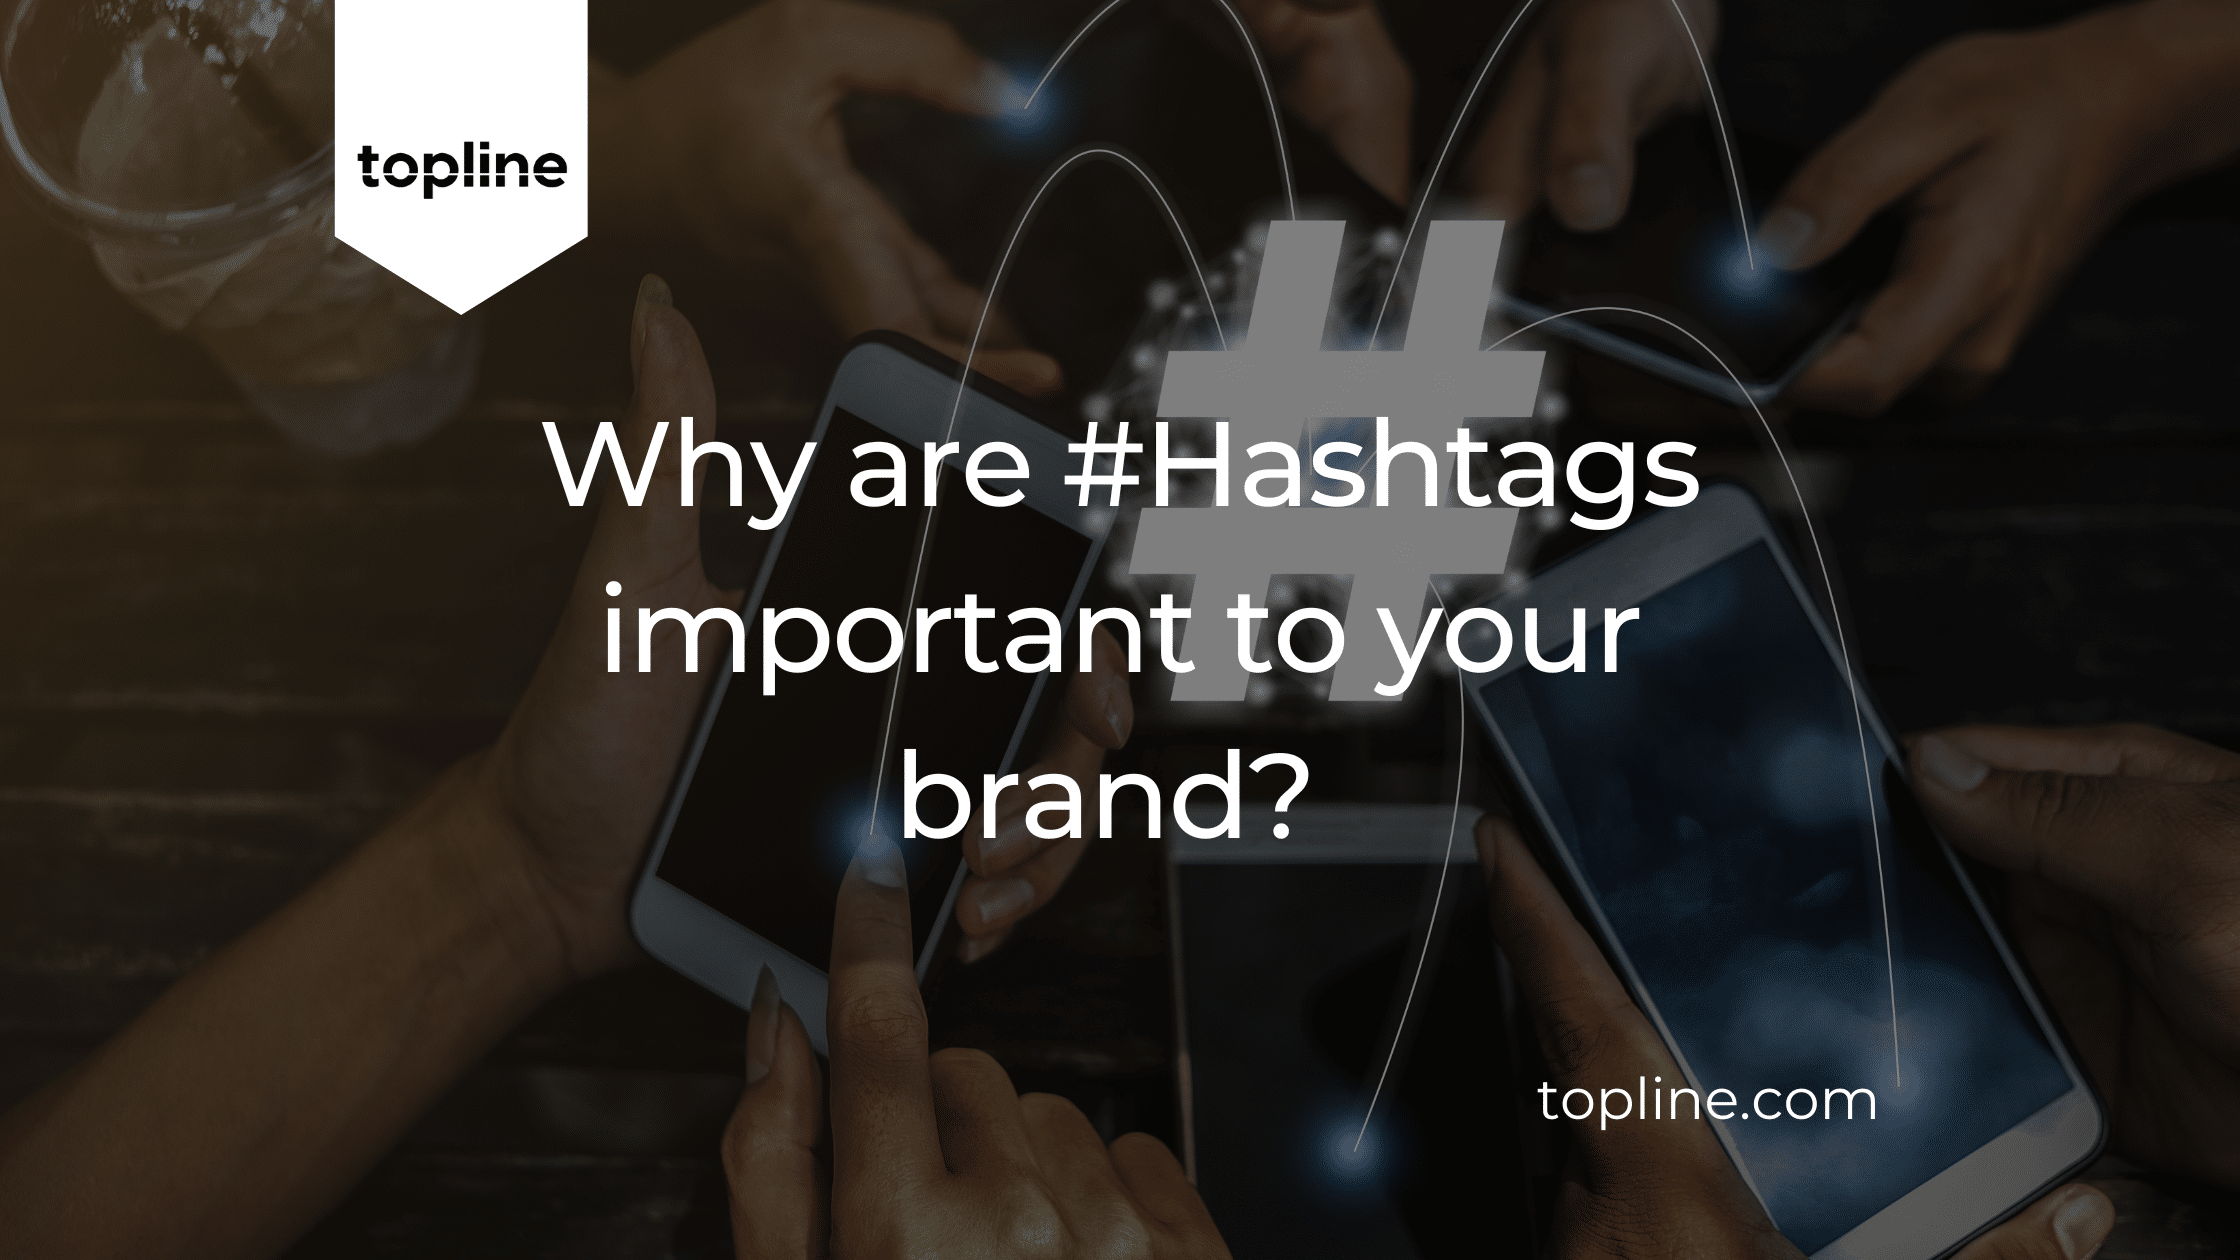 Why are #hashtags important to your brand?